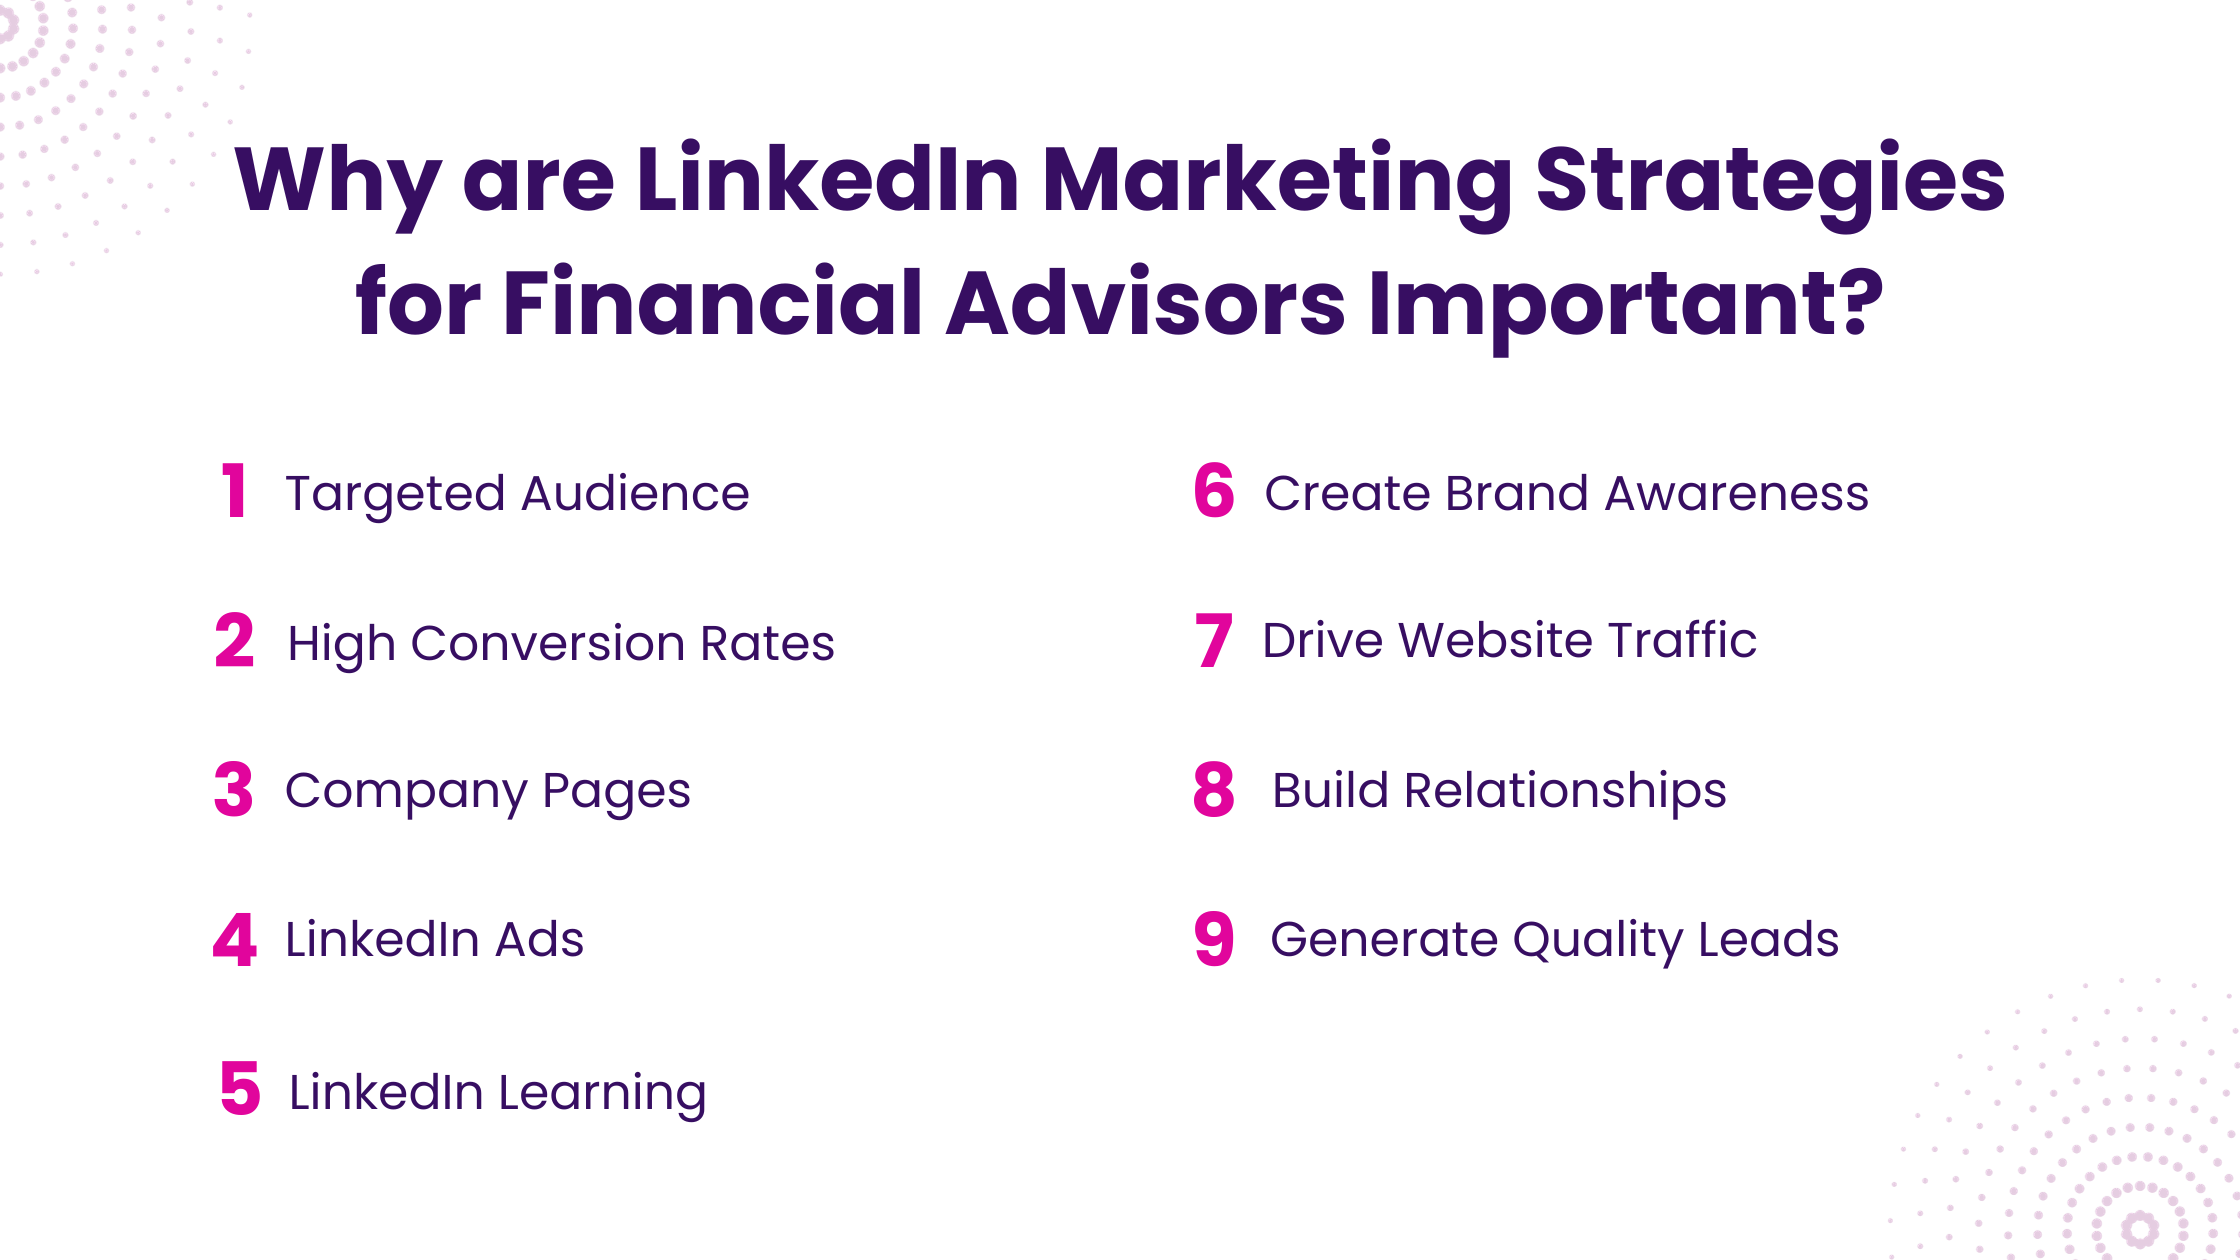 Why are LinkedIn Marketing Strategies for Financial Advisors Important